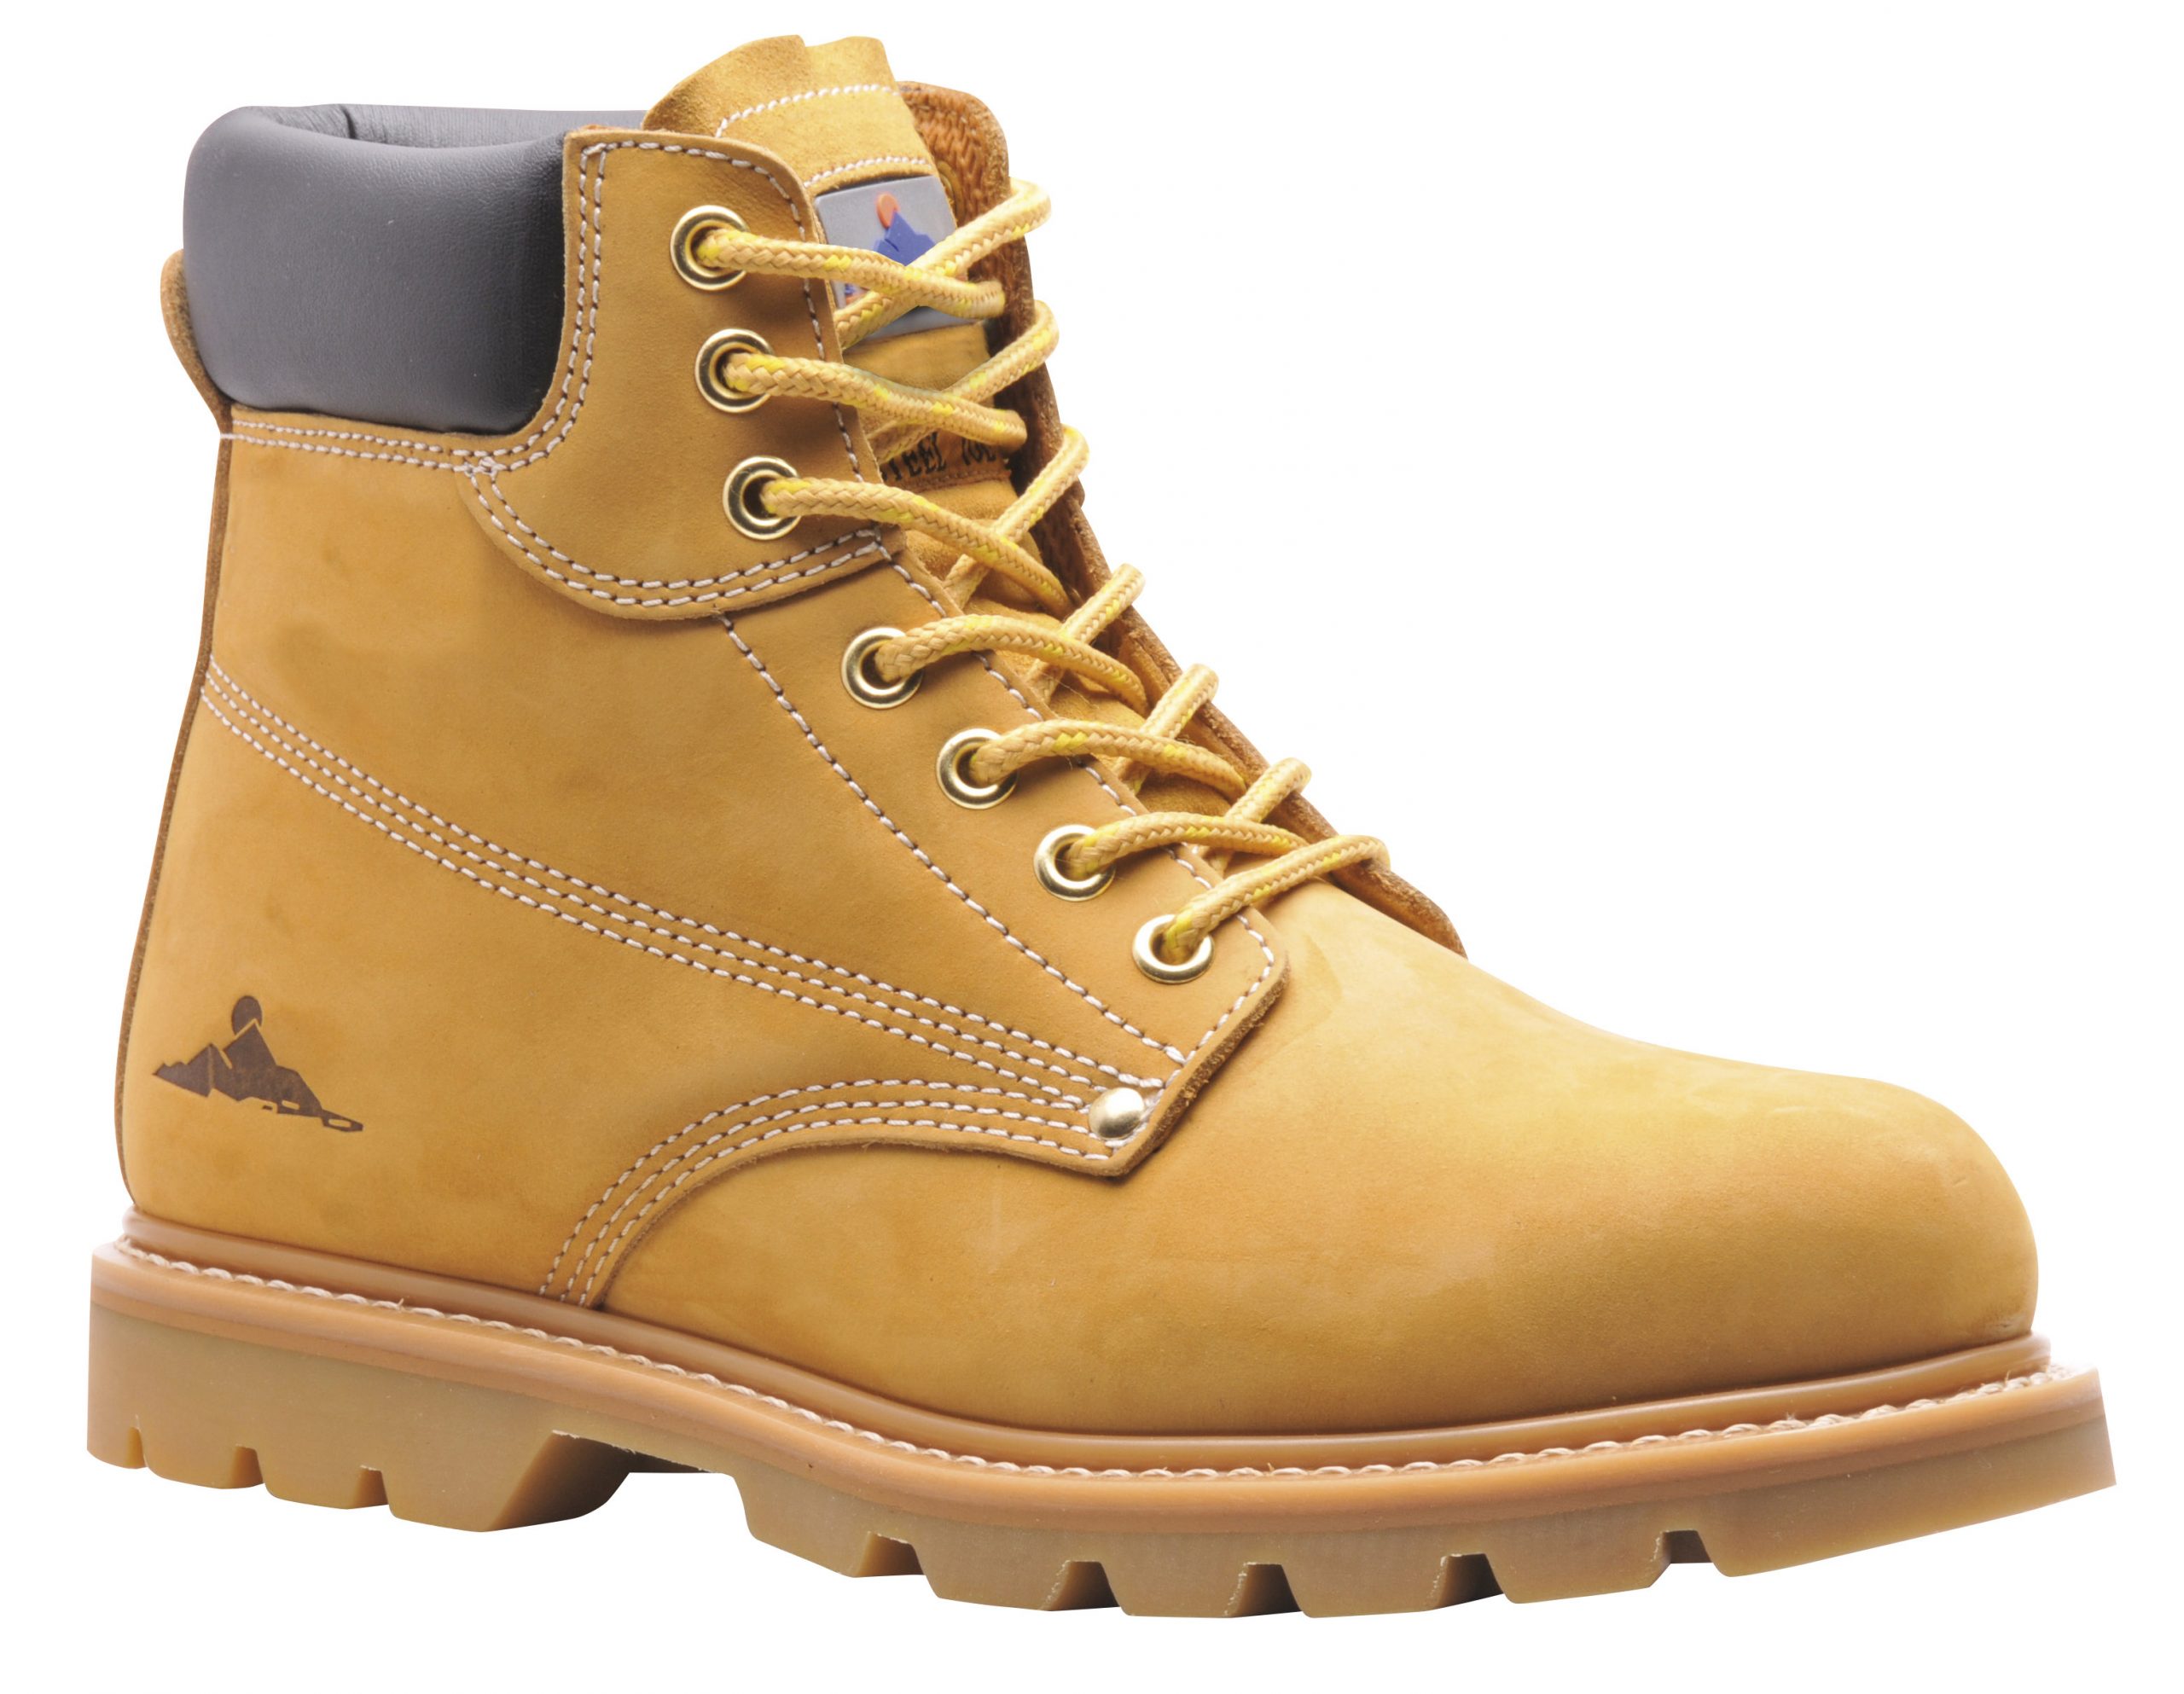 Portwest FW17 Steelite Welted Work Safety Boot with Protective Steel Toe ASTM 